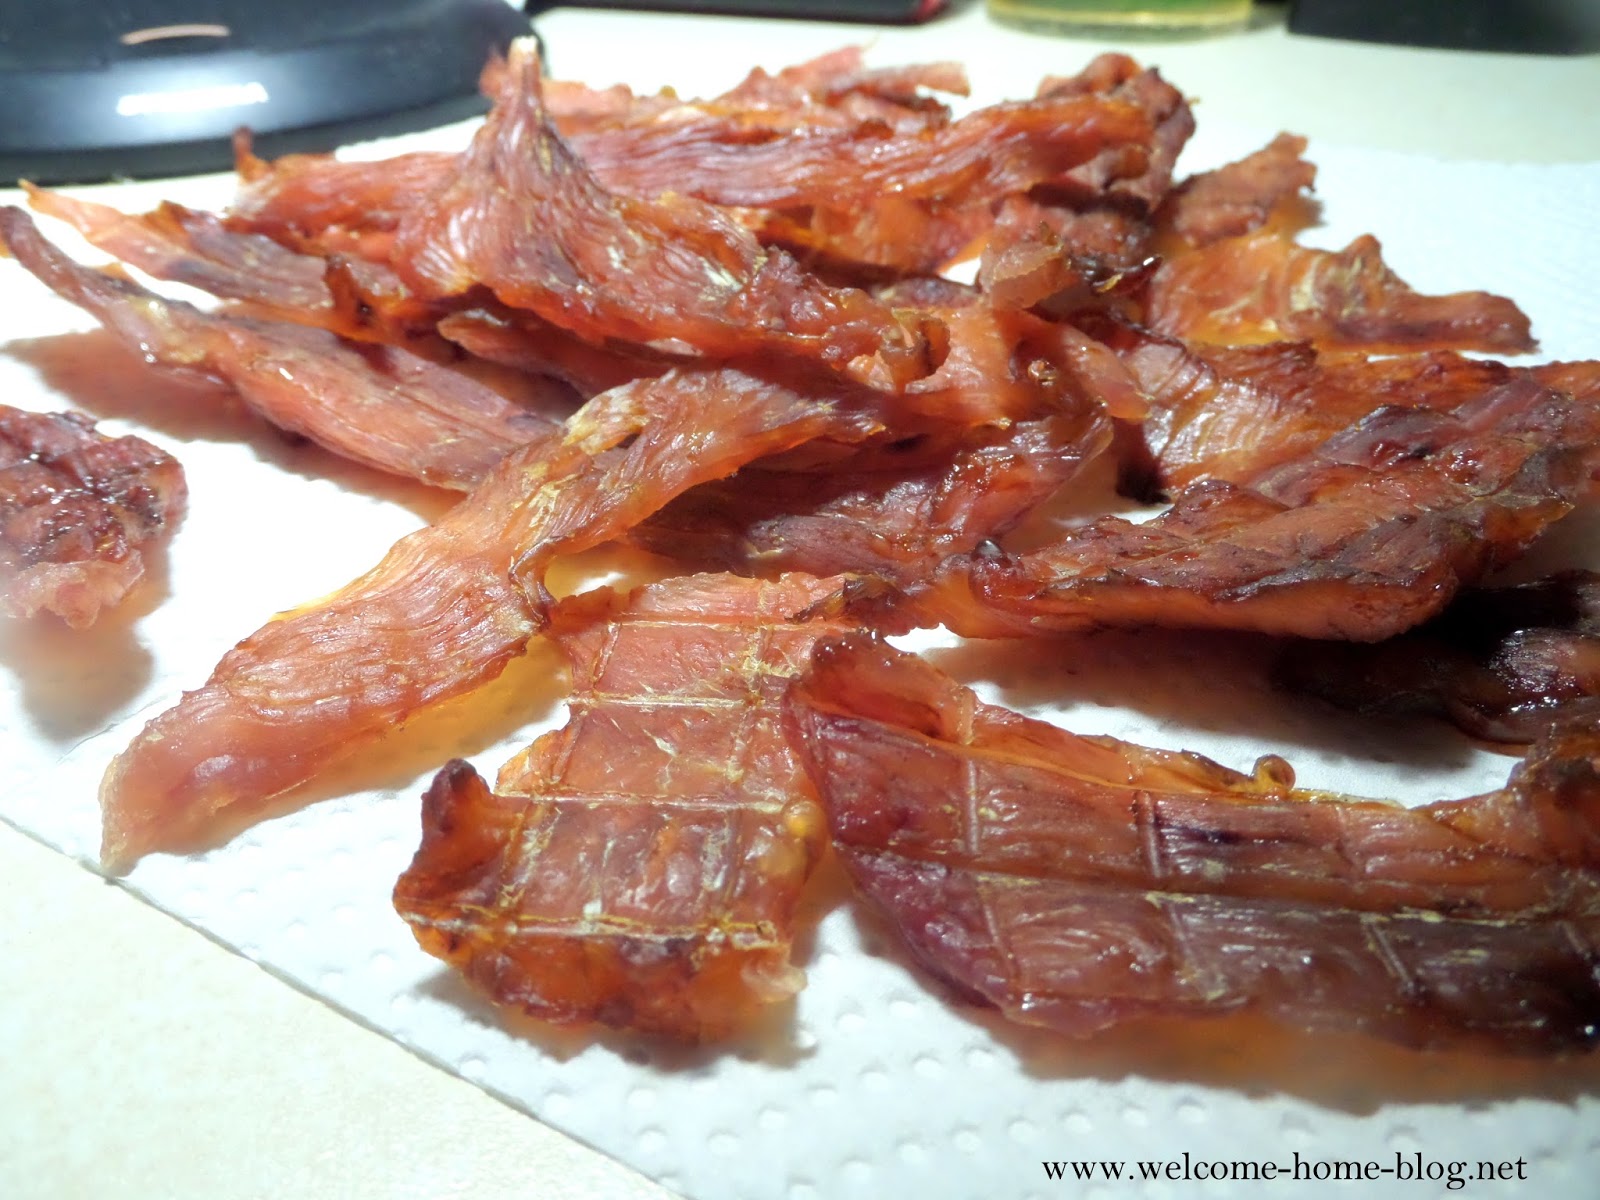 Welcome Home Blog: Homemade Turkey Jerky Treats For Dogs